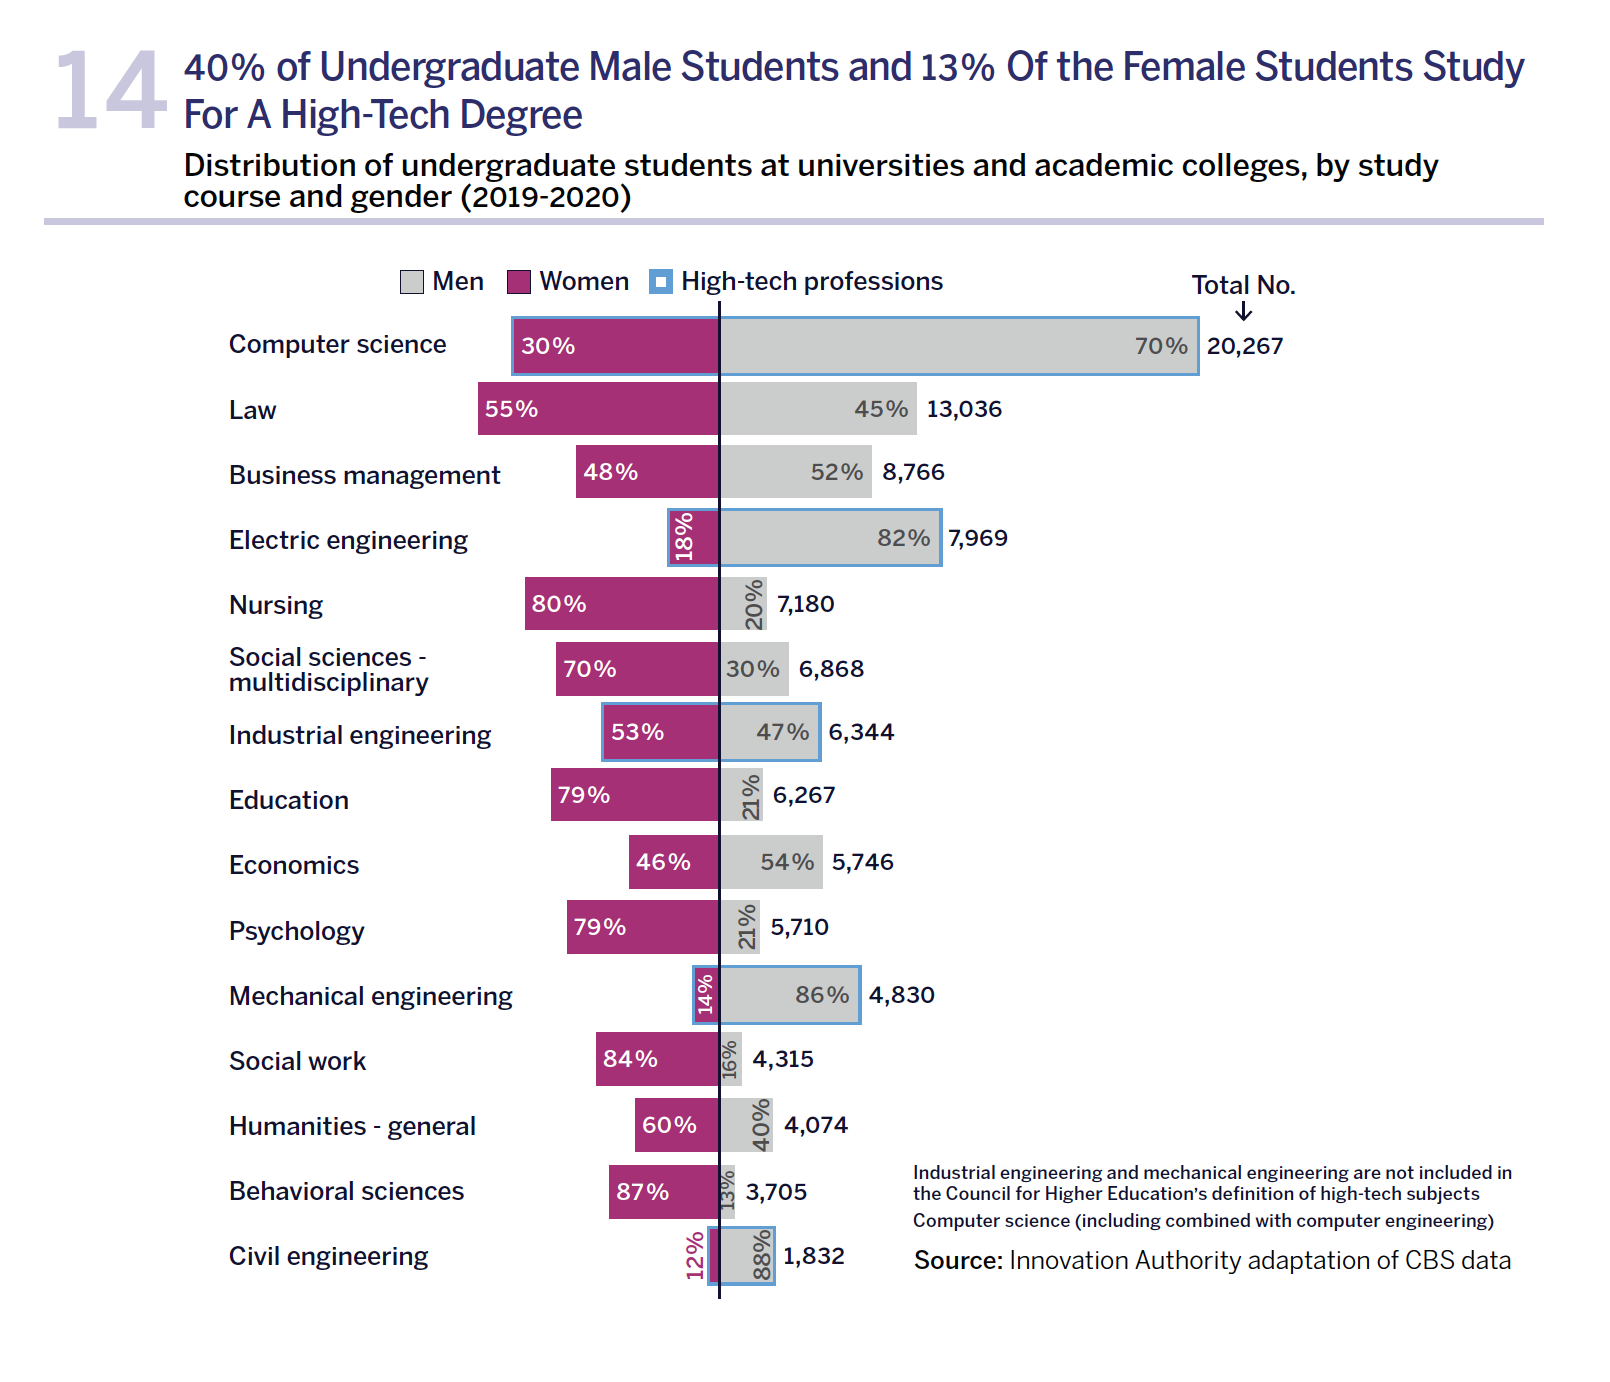 40% of Undergraduate Male Students and 13% Of the Female Students Study For